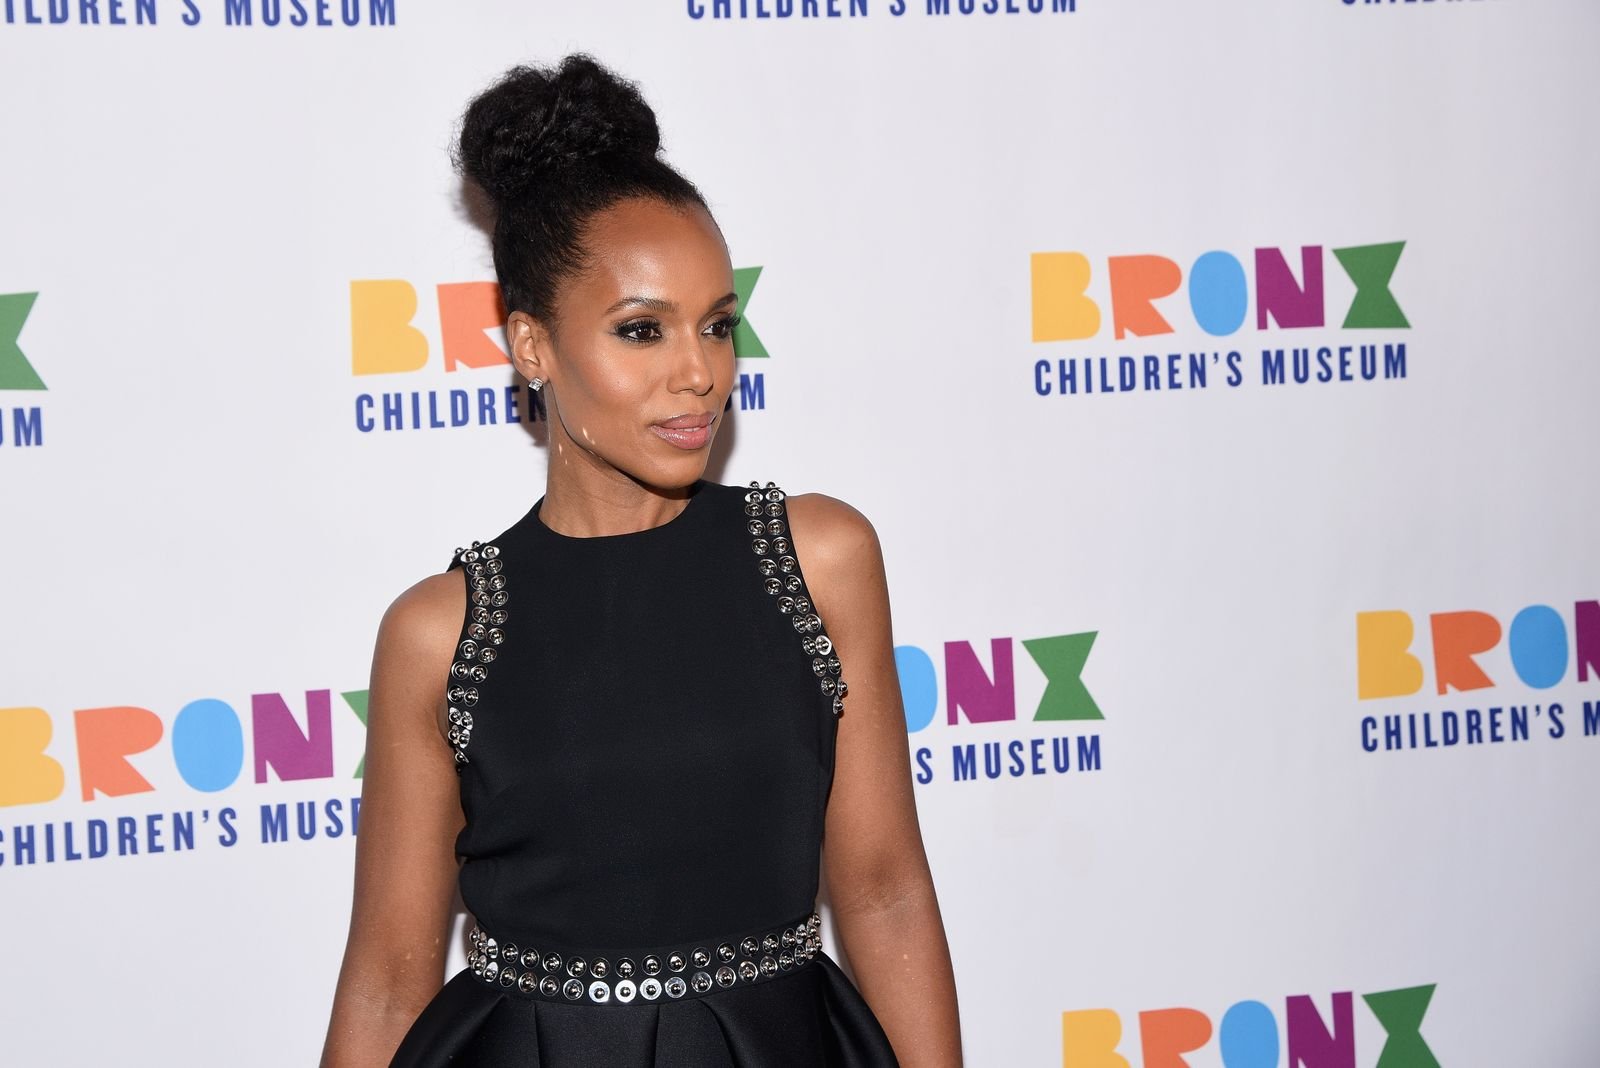 Kerry Washington attends the Bronx Children's Museum Gala at Edison Ballroom on May 8, 2018. | Photo: Getty Images